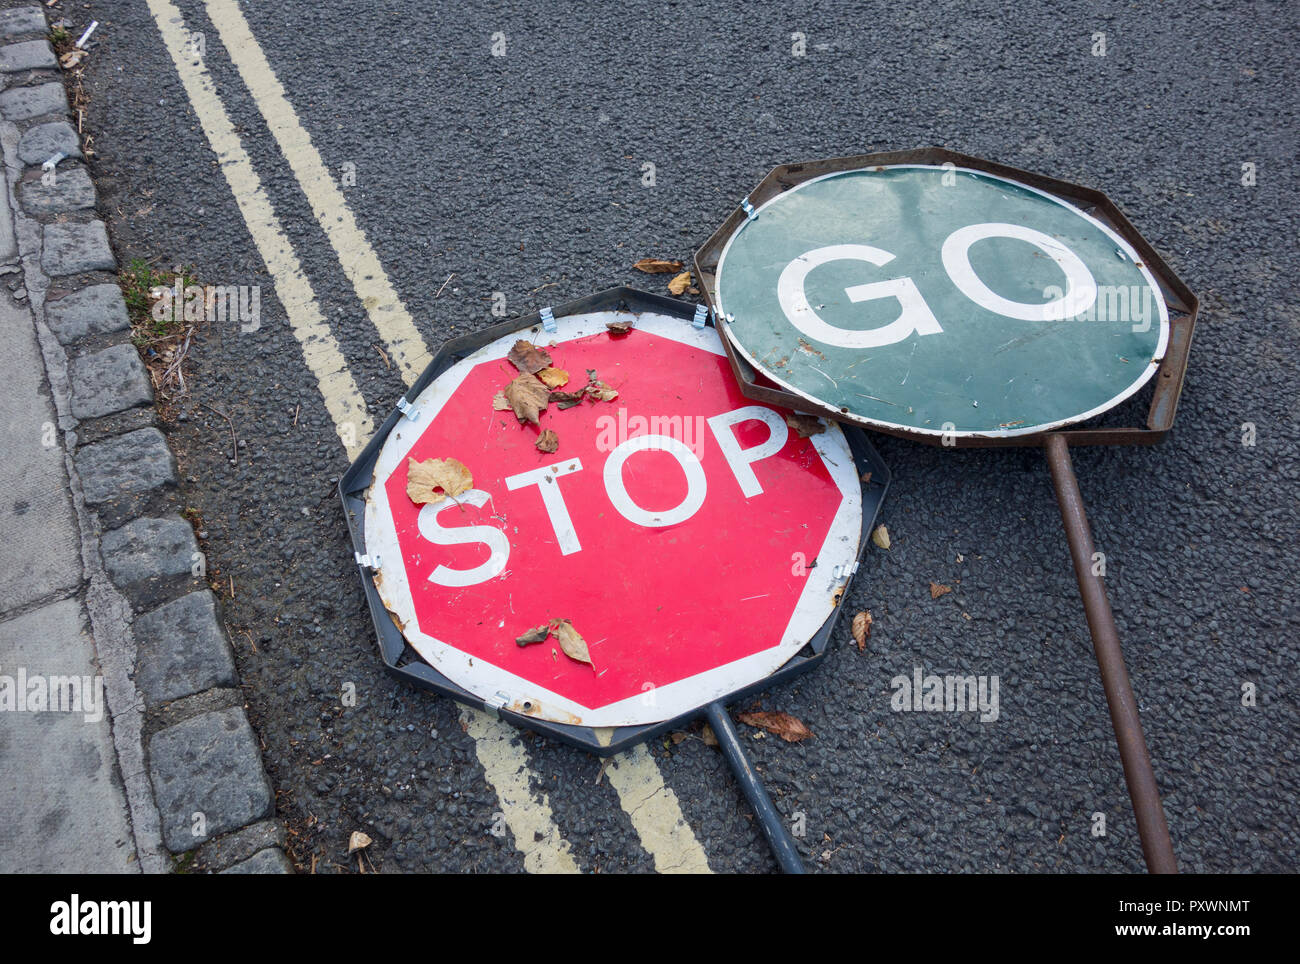 Stop-Go traffic indicator signs discarded on a road in the UK Stock Photo